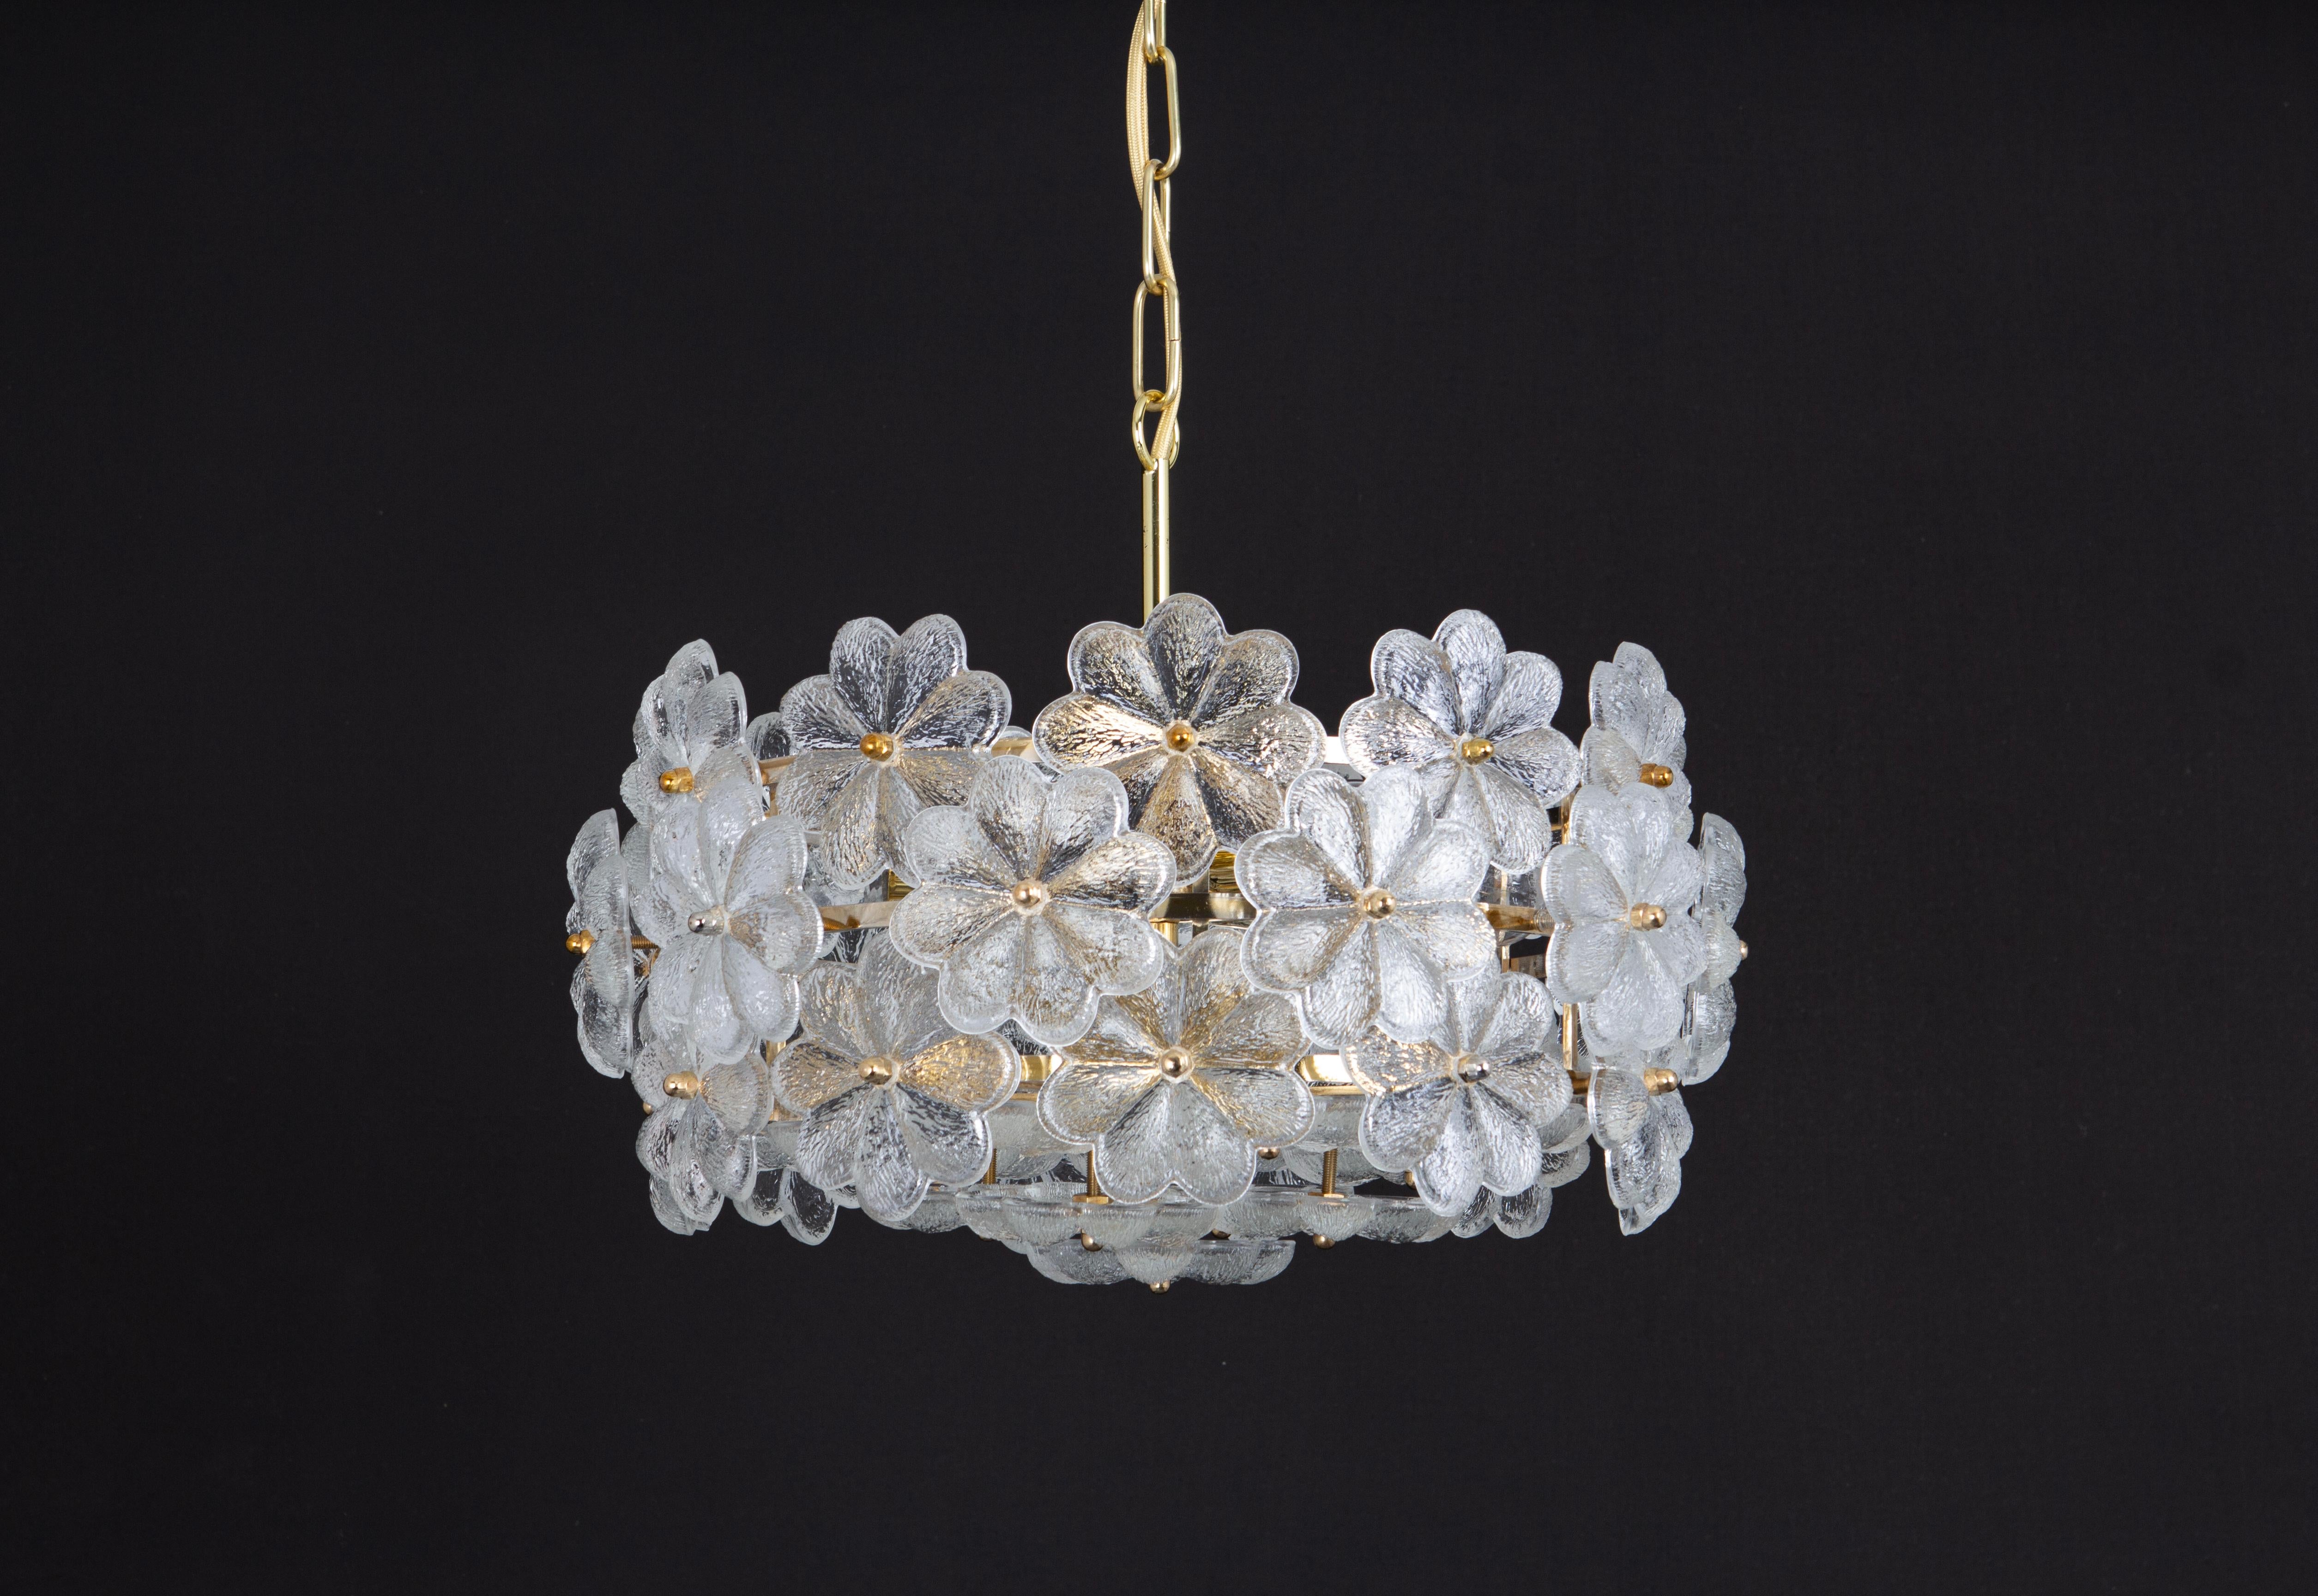 1 of 2 Stunning Petite Murano Glass Chandelier by Ernst Palme, Germany, 1970s For Sale 2